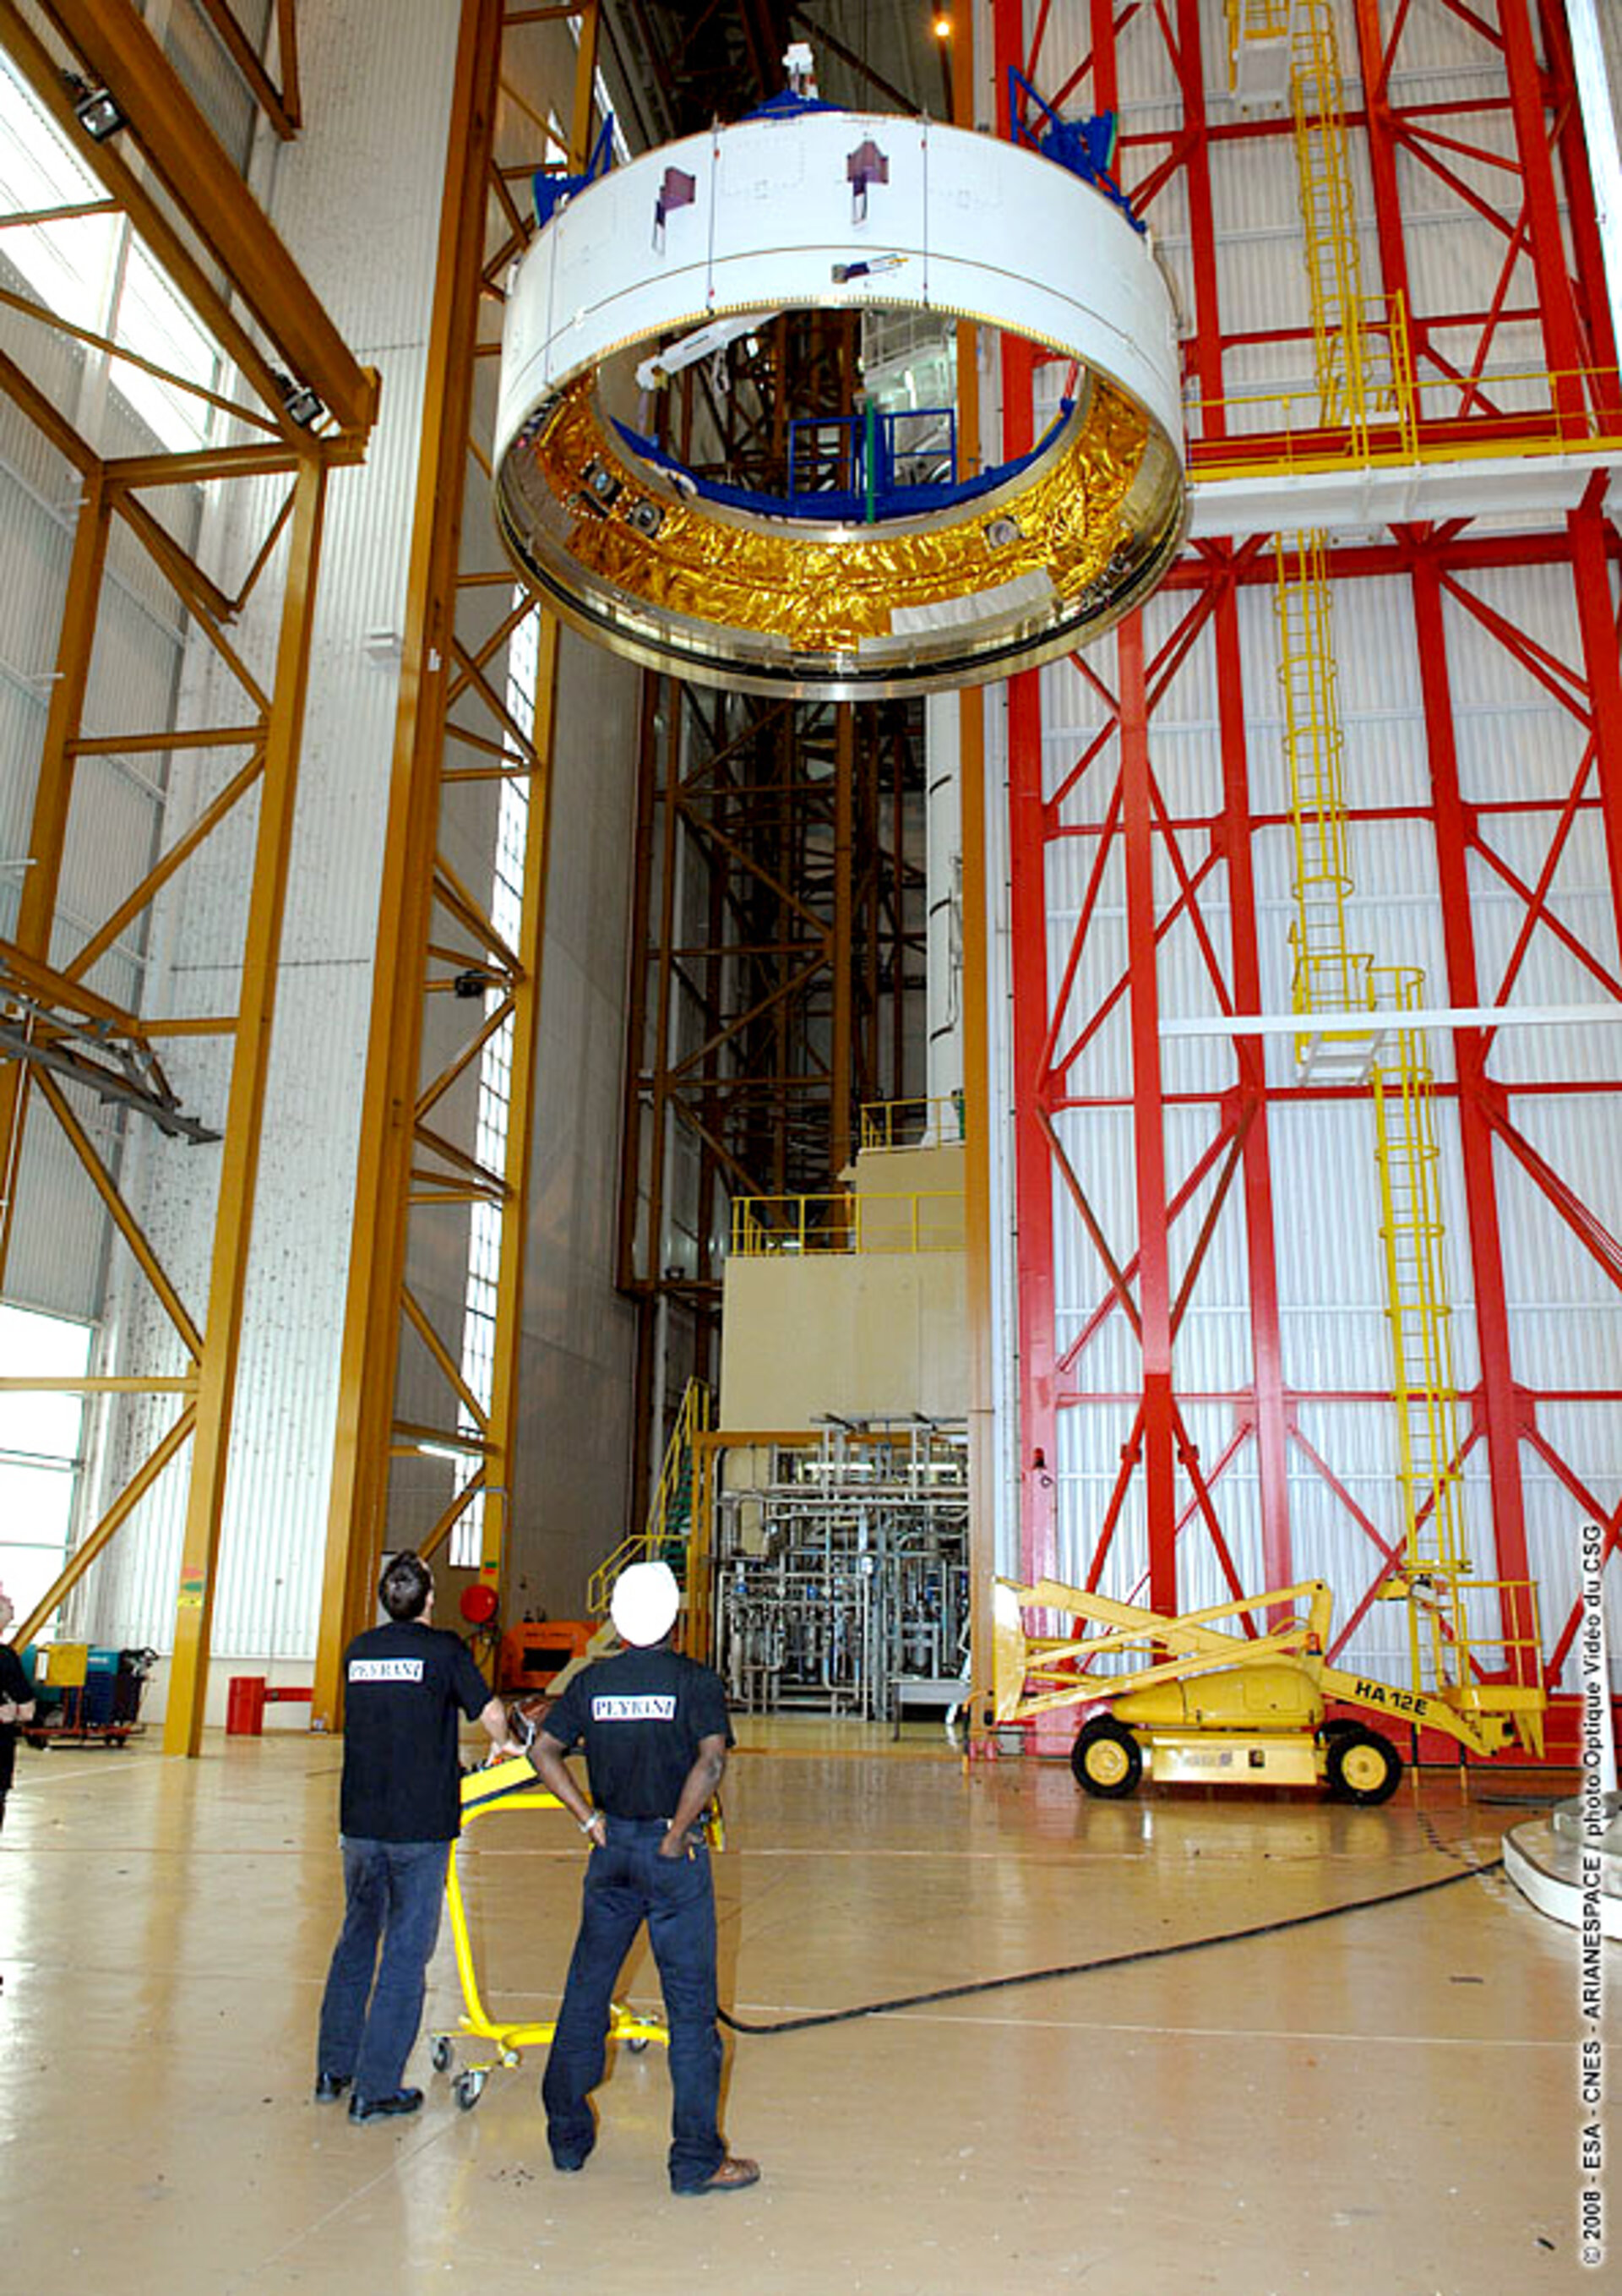 Engineers at Europe's Spaceport in Kourou, French Guiana, prepare the Ariane 5 ES ATV for the Jules Verne flight